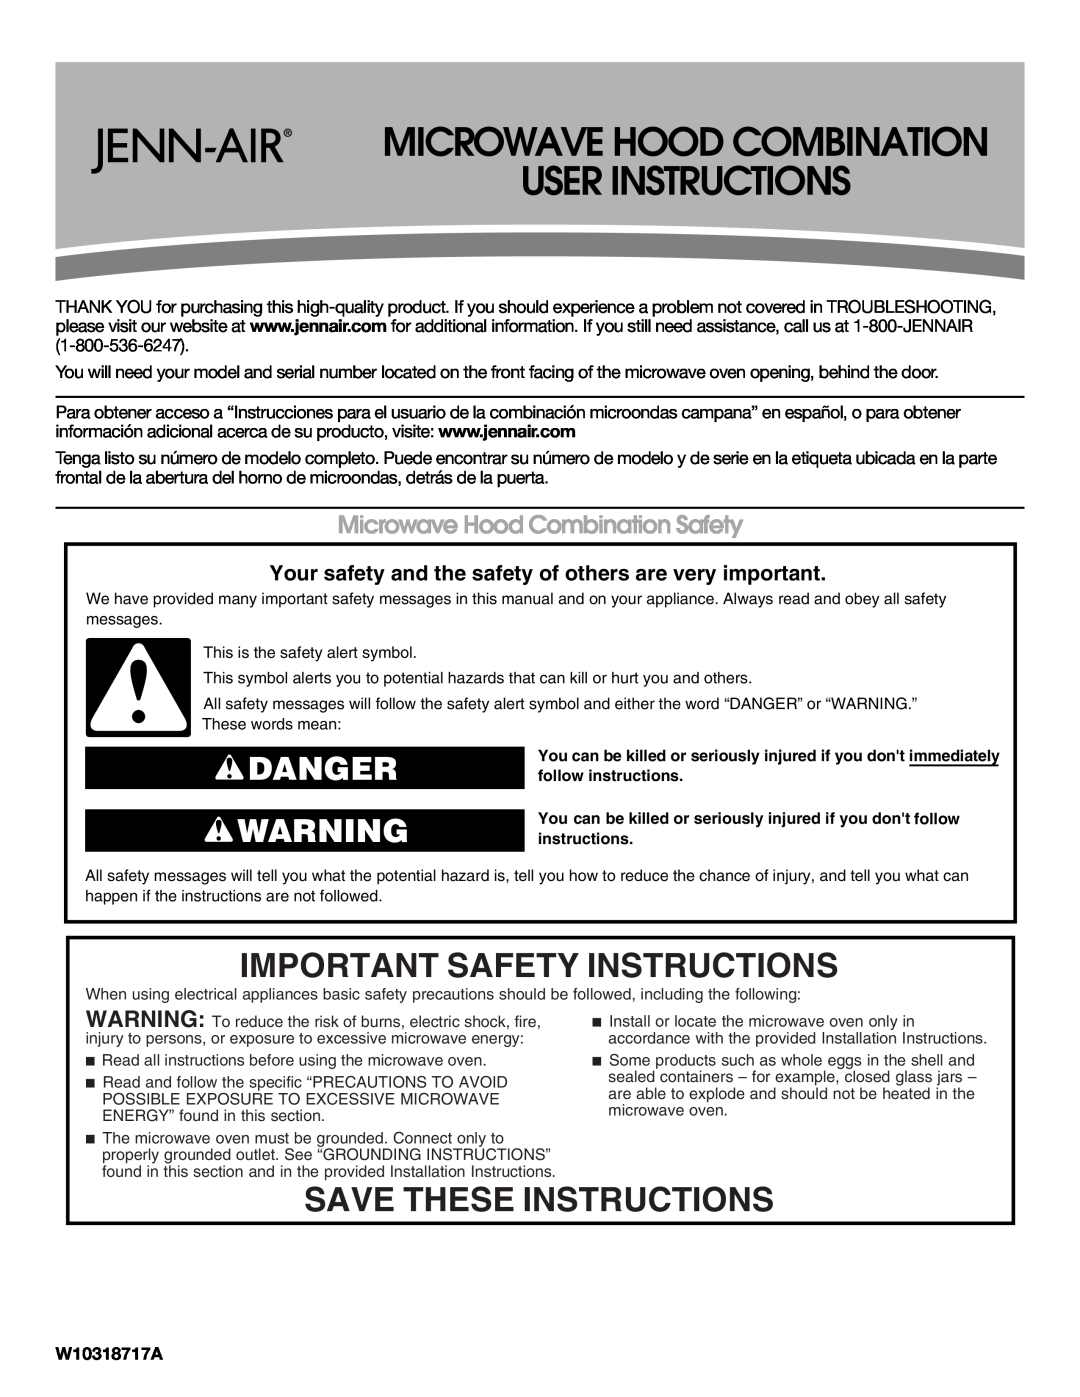 Jenn-Air W10318717A important safety instructions Important Safety Instructions, Save These Instructions, Danger 